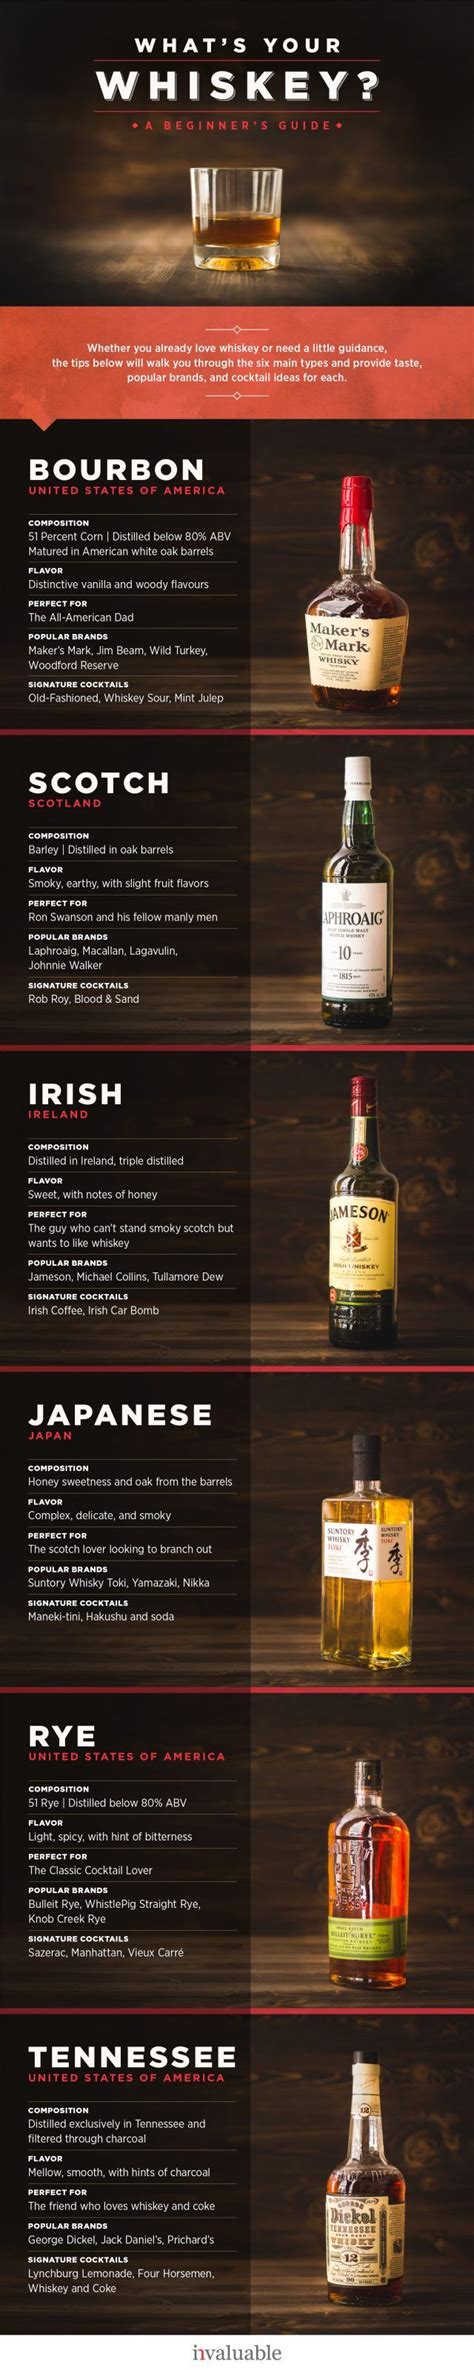 The Beginner’s Guide To Types Of Whiskey Daily Infographic Alcohol Drink Recipes Whiskey